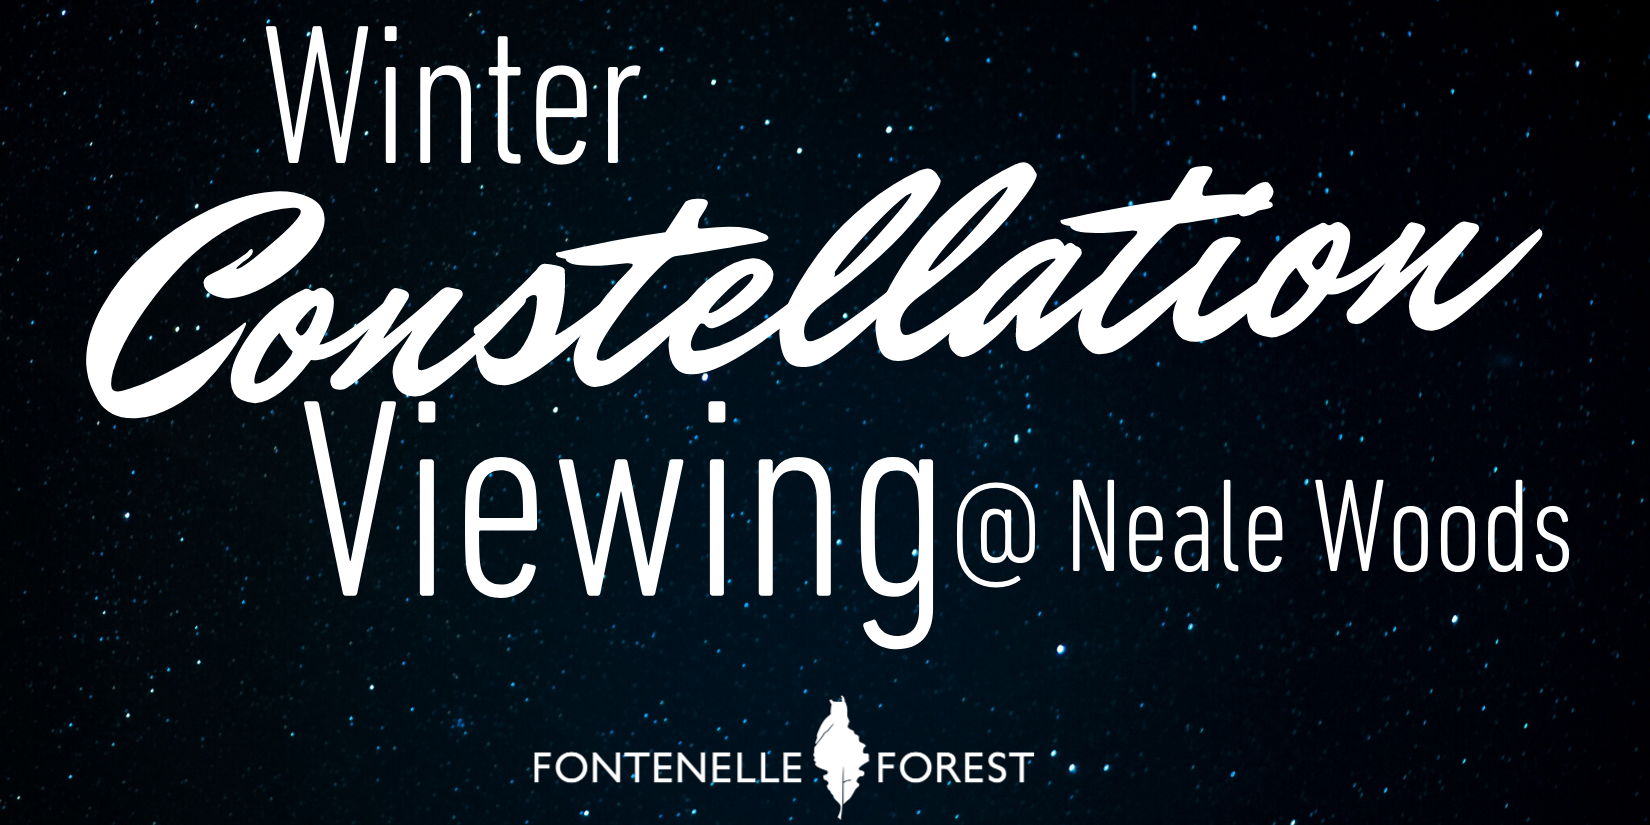 Winter Constellation Viewing at Neale Woods promotional image